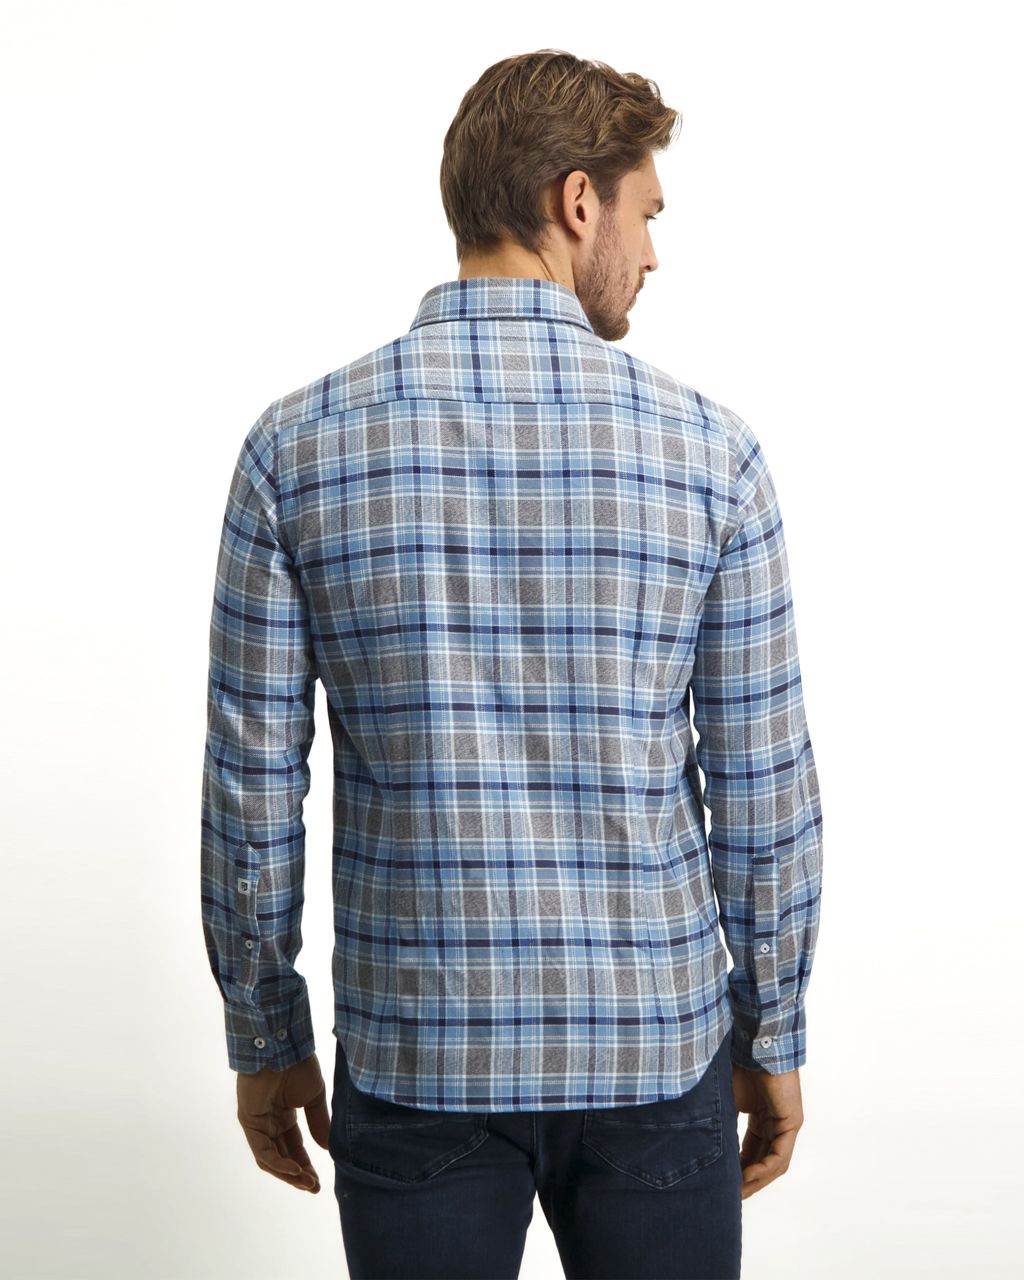 State of Art Casual Overhemd LM Blauw 075342-001-4XL